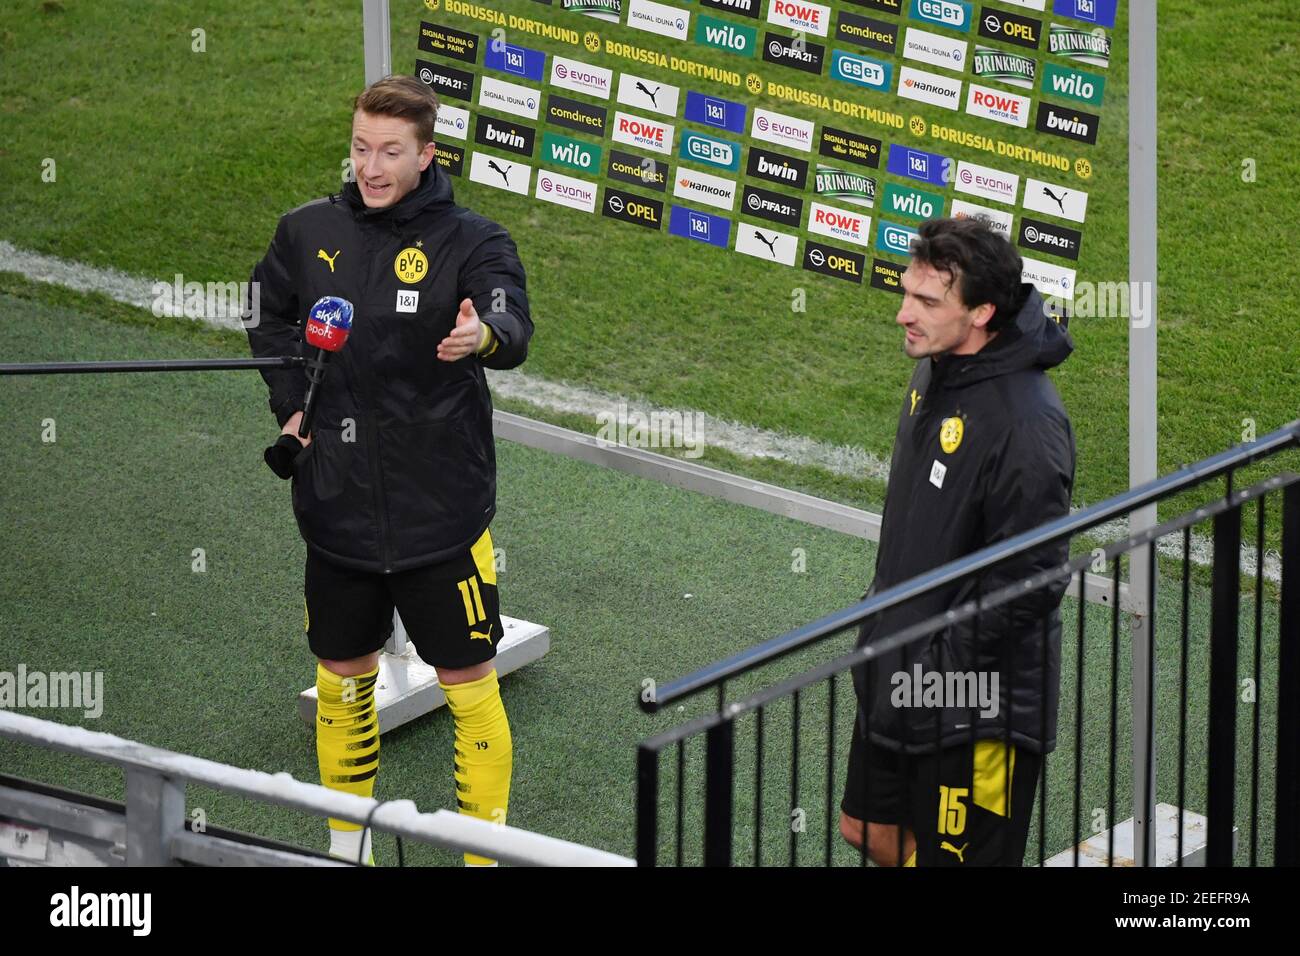 Marco REUS (DO) and Mats HUMMELS (DO) disappointed during the interview  after the game, Soccer 1. Bundesliga, 21st matchday, Borussia Dortmund (DO)  - TSG 1899 Hoffenheim (1899) 2: 2, on September 19,